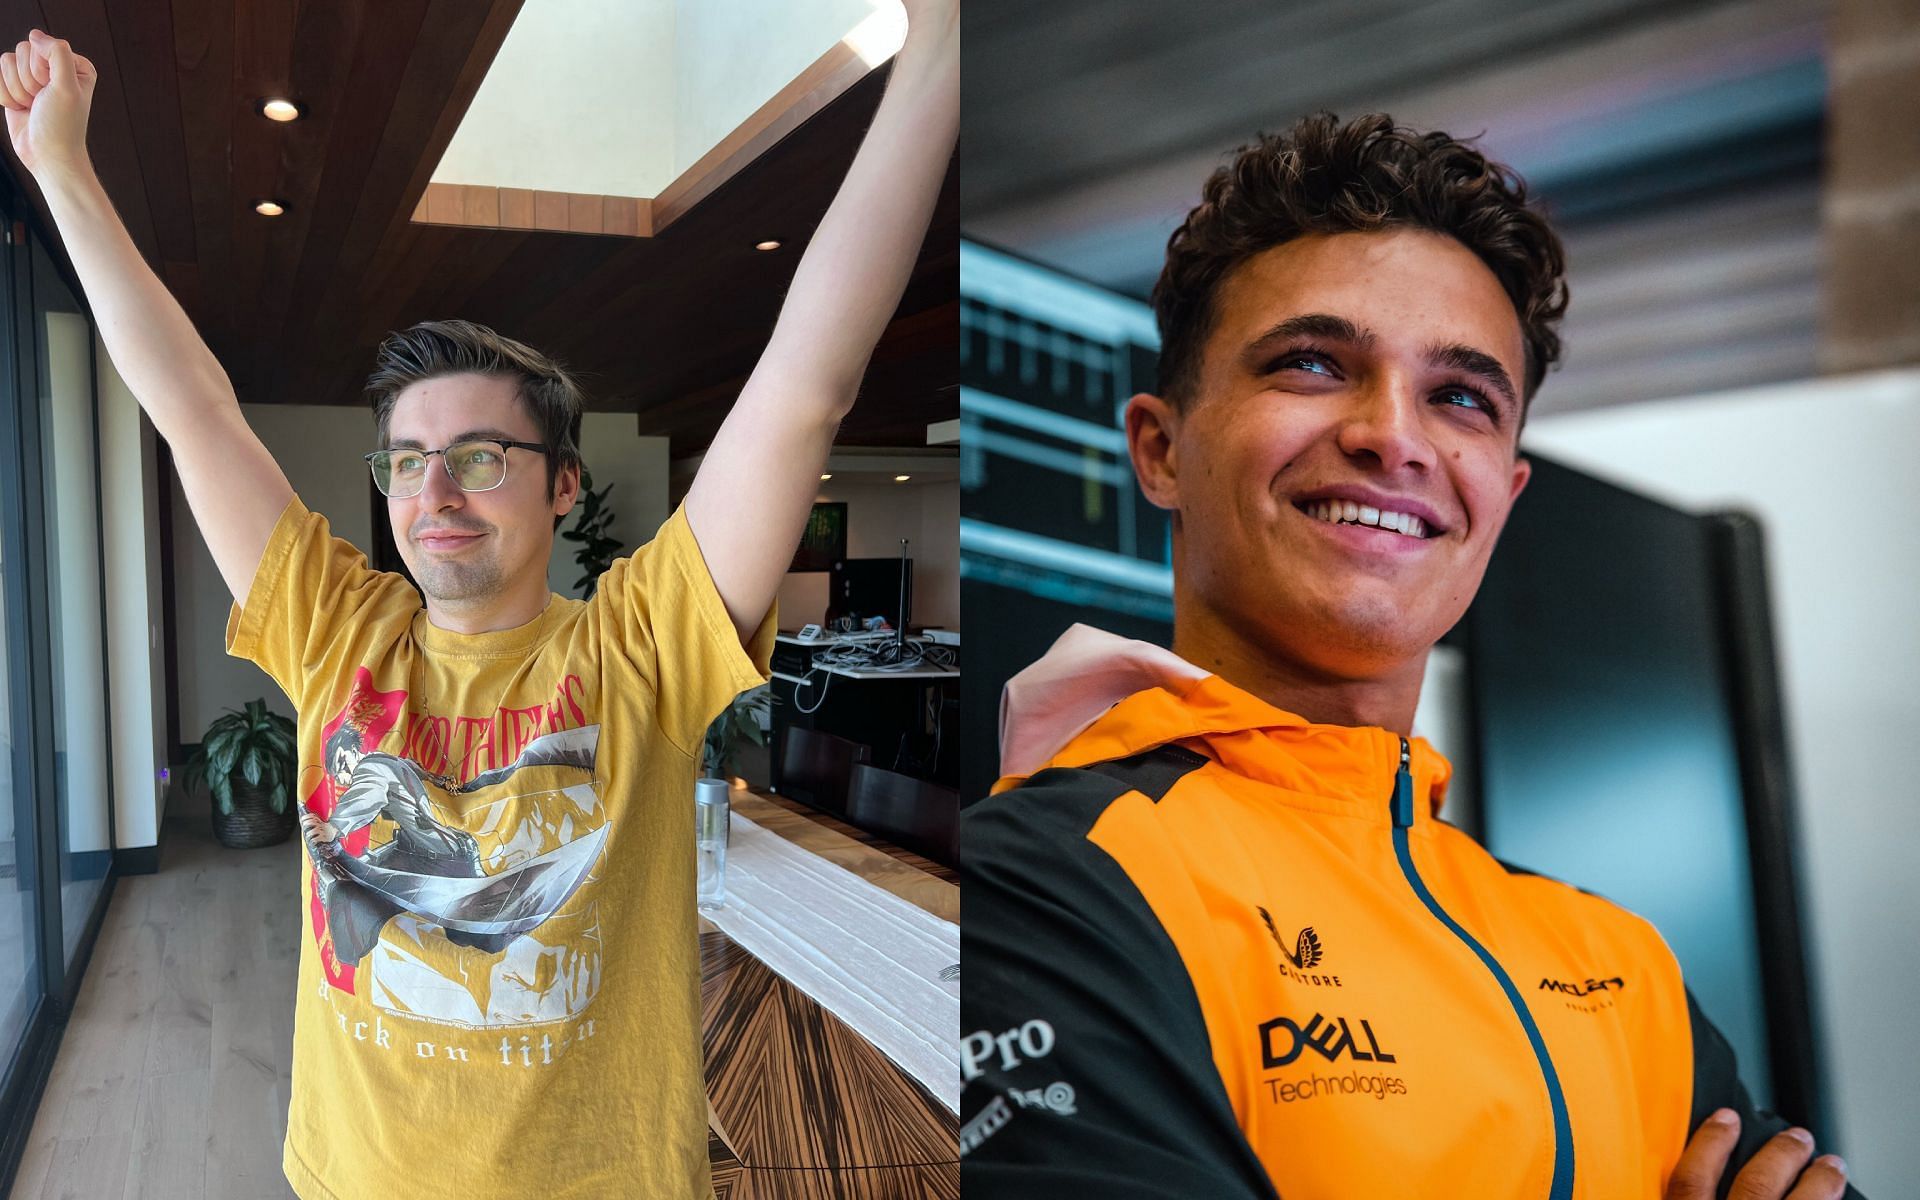 Shrouds Twitch chat reminds McLaren F1 driver Lando Norris about his